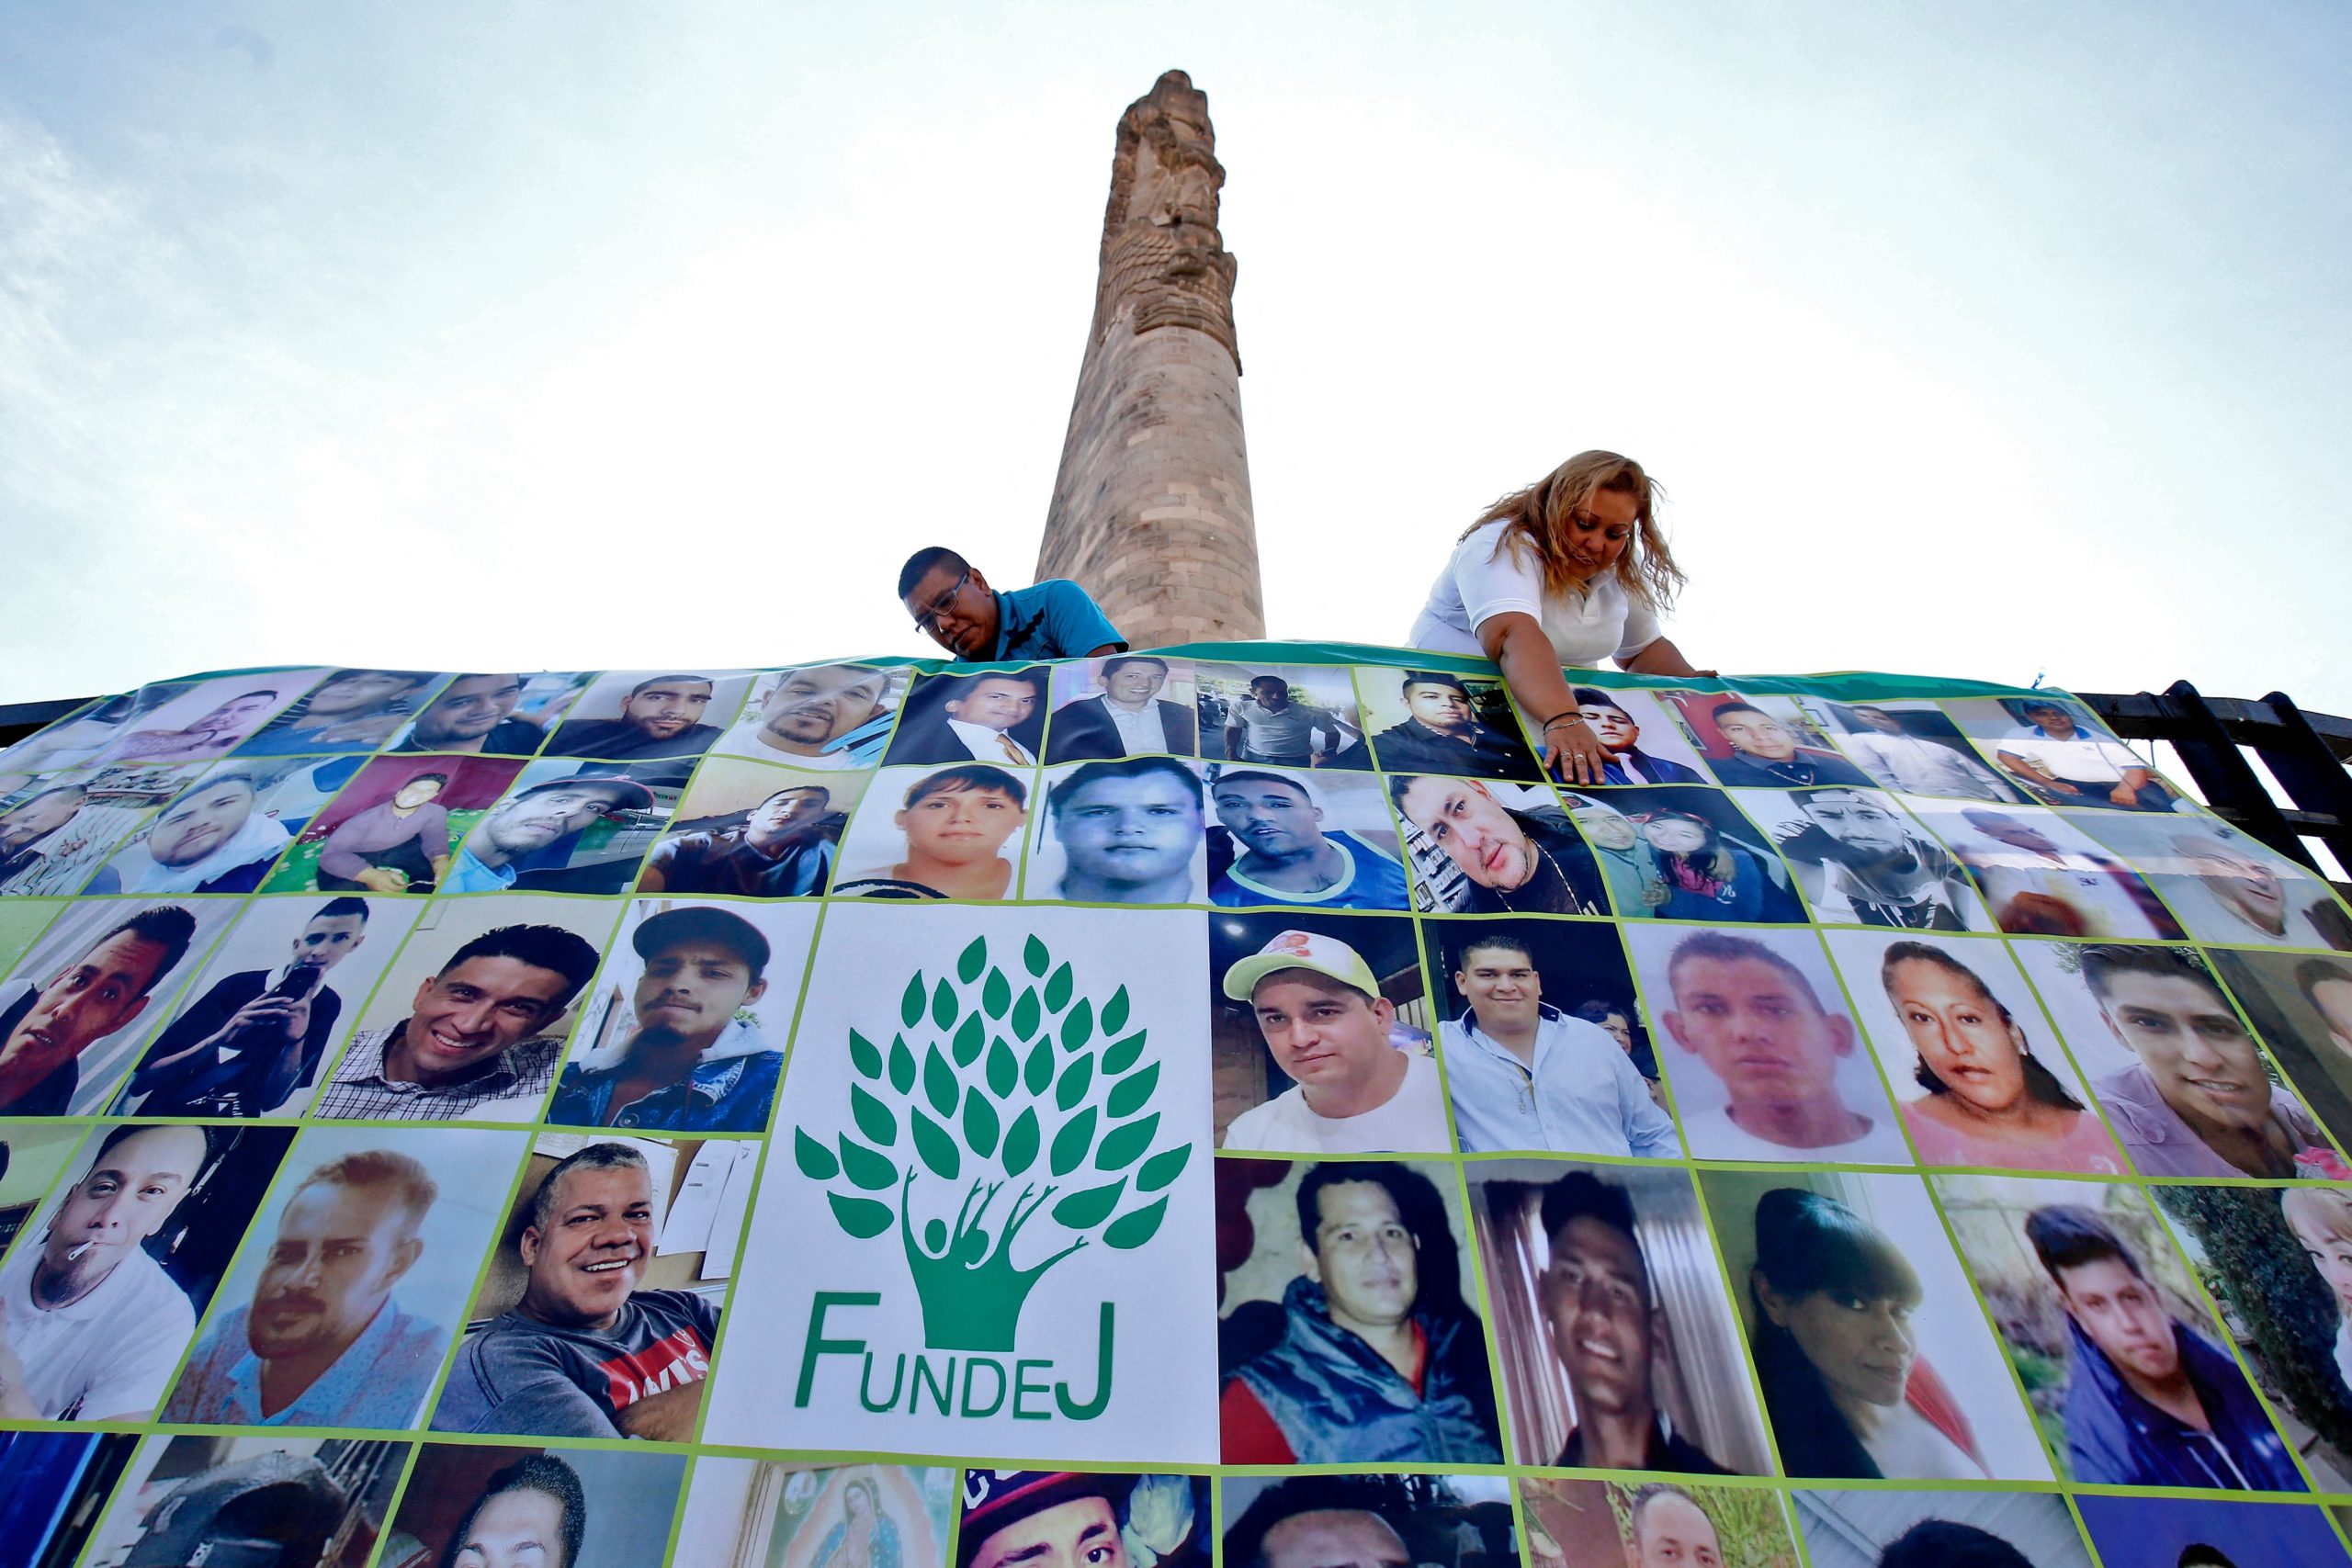 EDITORS NOTE: Graphic content / TOPSHOT - Members of the Familias Unidas por Nuestros desaparecidos Jalisco (United Families for Our Disappeared Jalisco, FUNDEJ) association prepare a banner with portraits of disappeared people in Guadalajara, Jalisco State, Mexico, on November 22, 2019. - AFP has mobilized several of its photographers in Mexico around a project entitled Twenty-four hours in Mexico in the shadow of violence to capture, from Thursday, November 21 at midnight to Friday, November 22, scenes of ordinary violence. Since December 2006, after the beginning of the federal anti-cartel offensive, there have been more than 250,000 murders reported in Mexico. (Photo by Ulises Ruiz / AFP) (Photo by ULISES RUIZ/AFP via Getty Images)